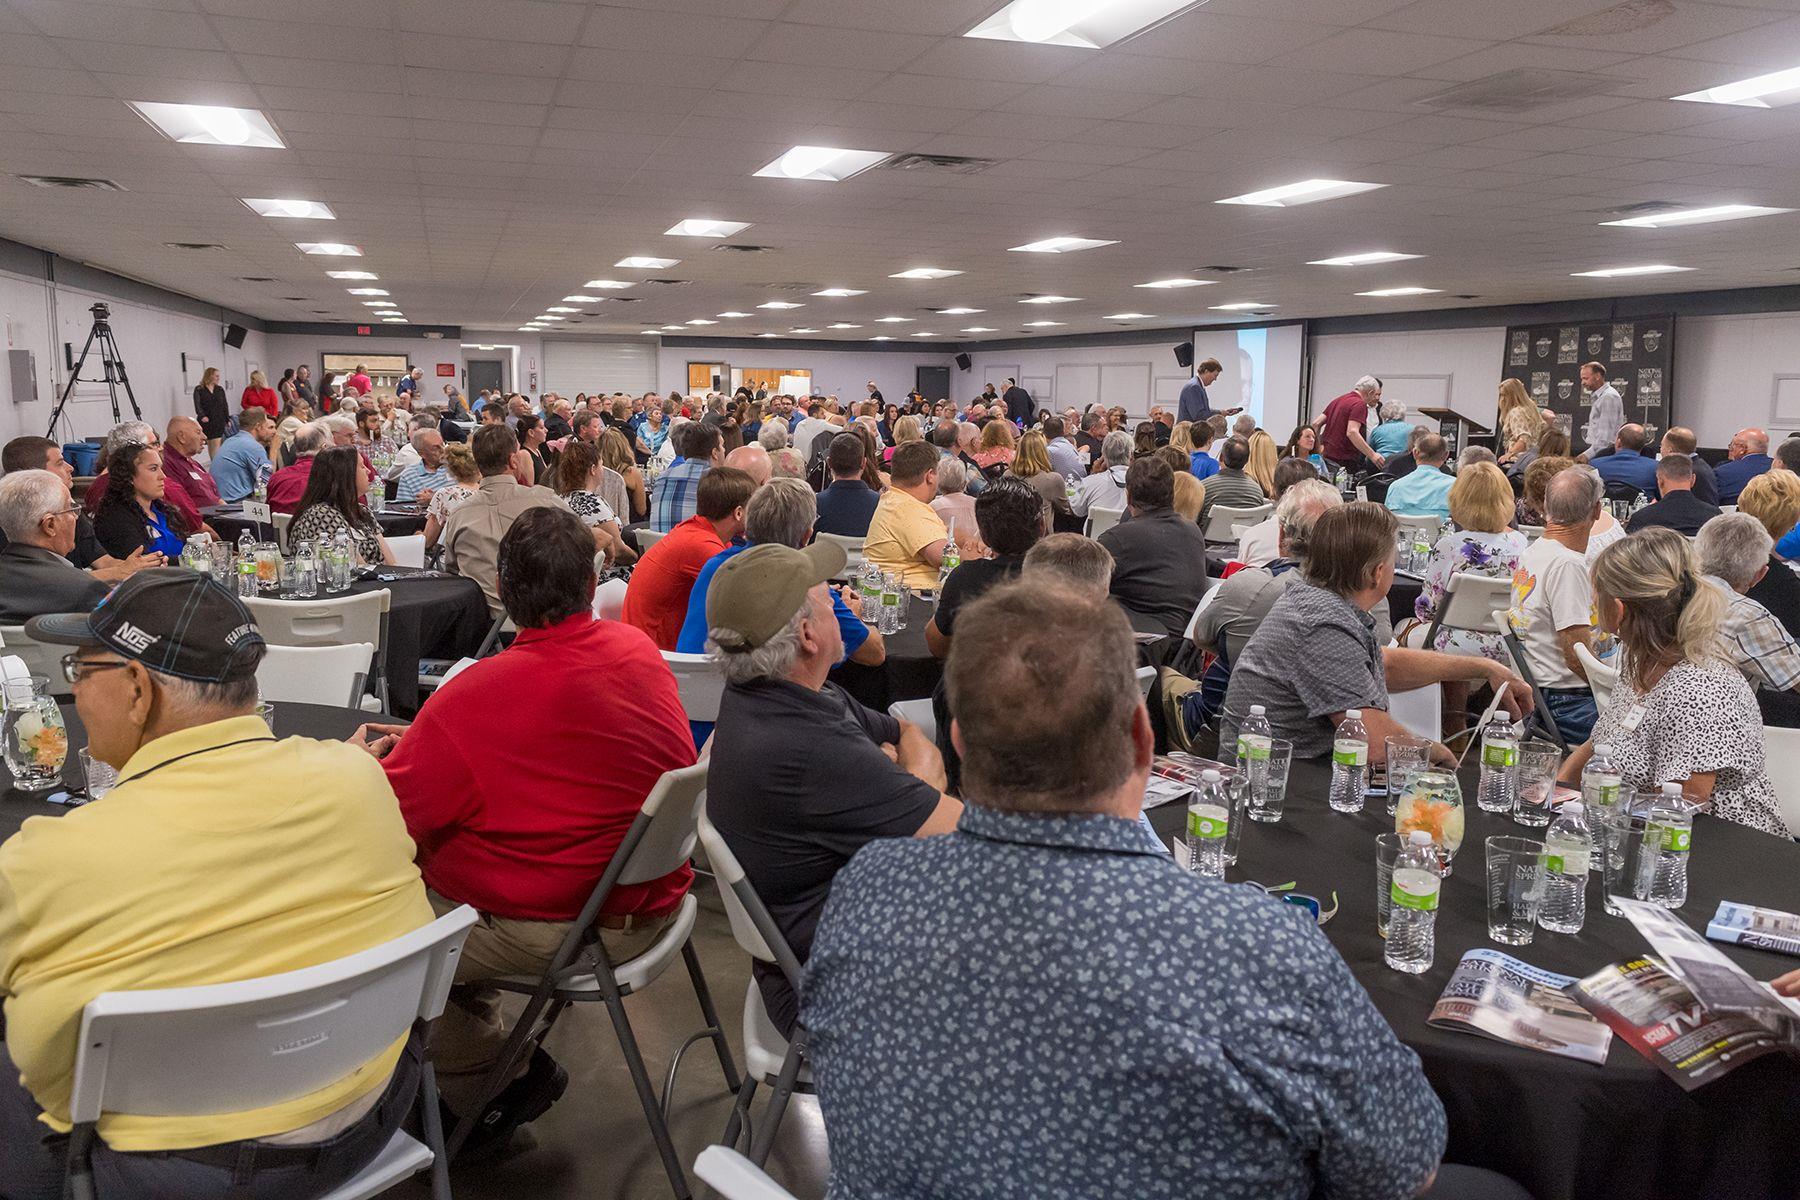 The 32nd National Sprint Car Hall of Fame & Museum Banquet is a Rousing Success!